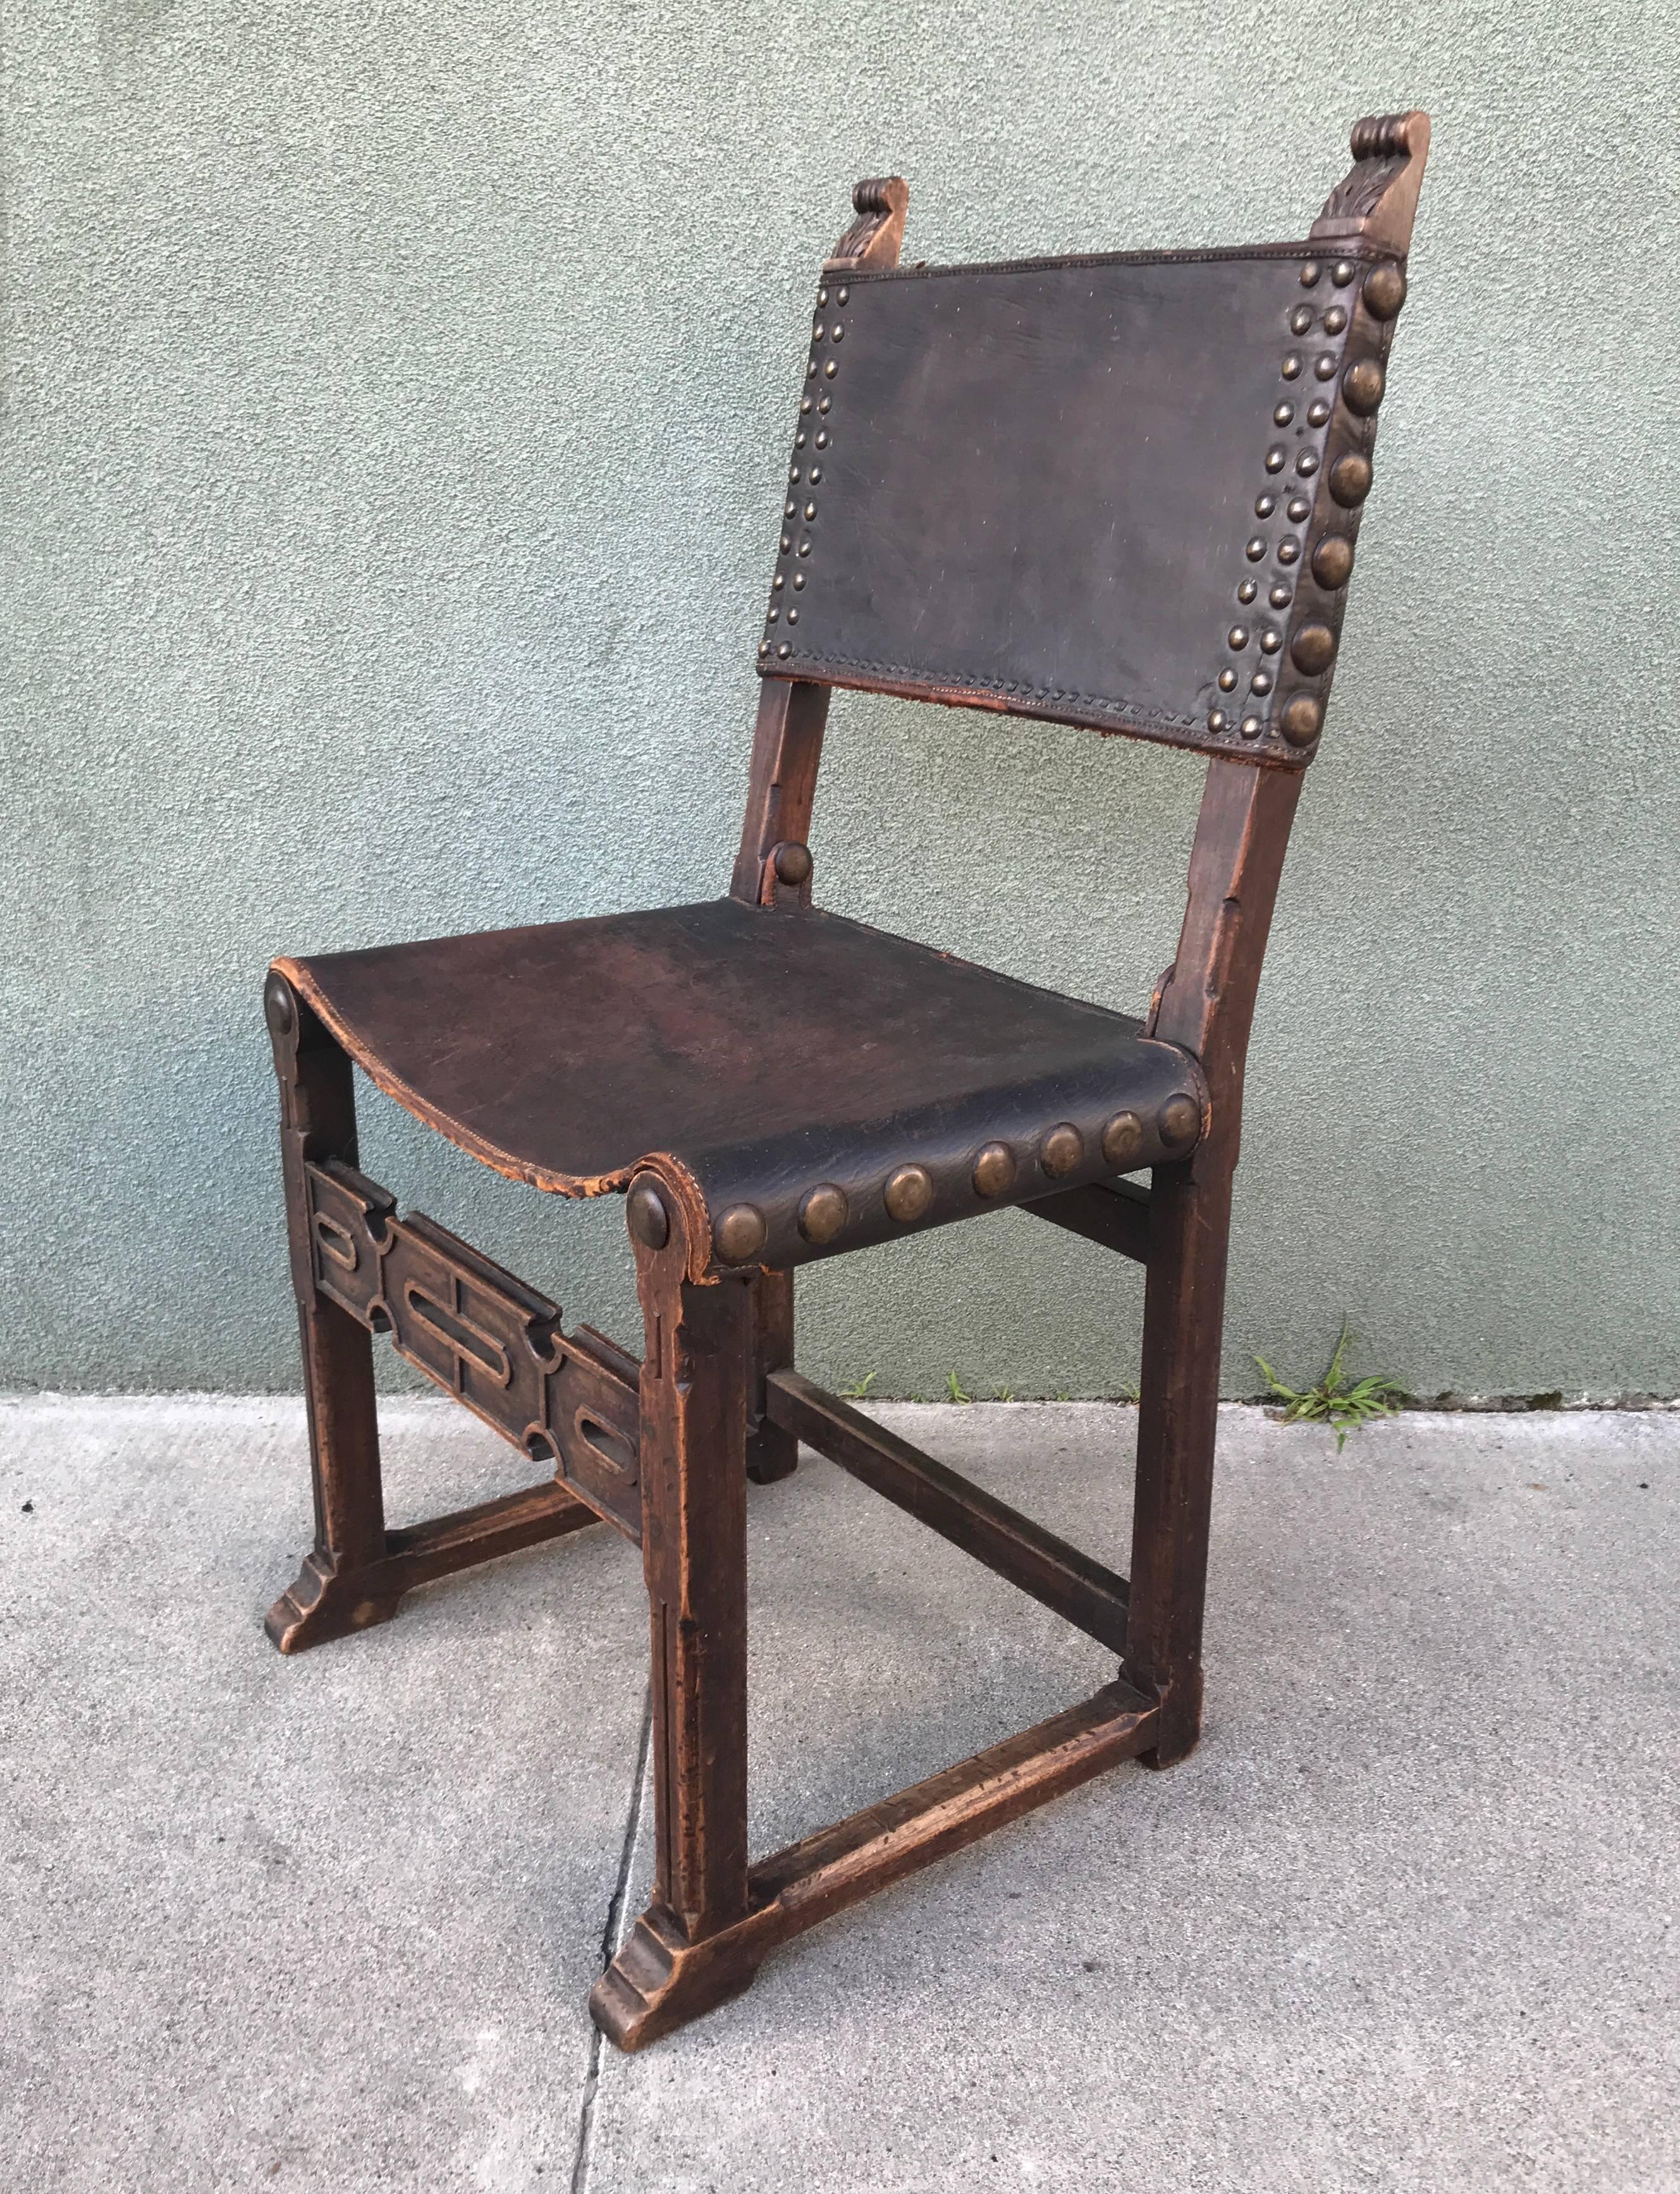 Spanish Revival chair from the 1920s carved accents to the wood with brass medallions on the sides and front, much patina to the chair, very rustic in nature.